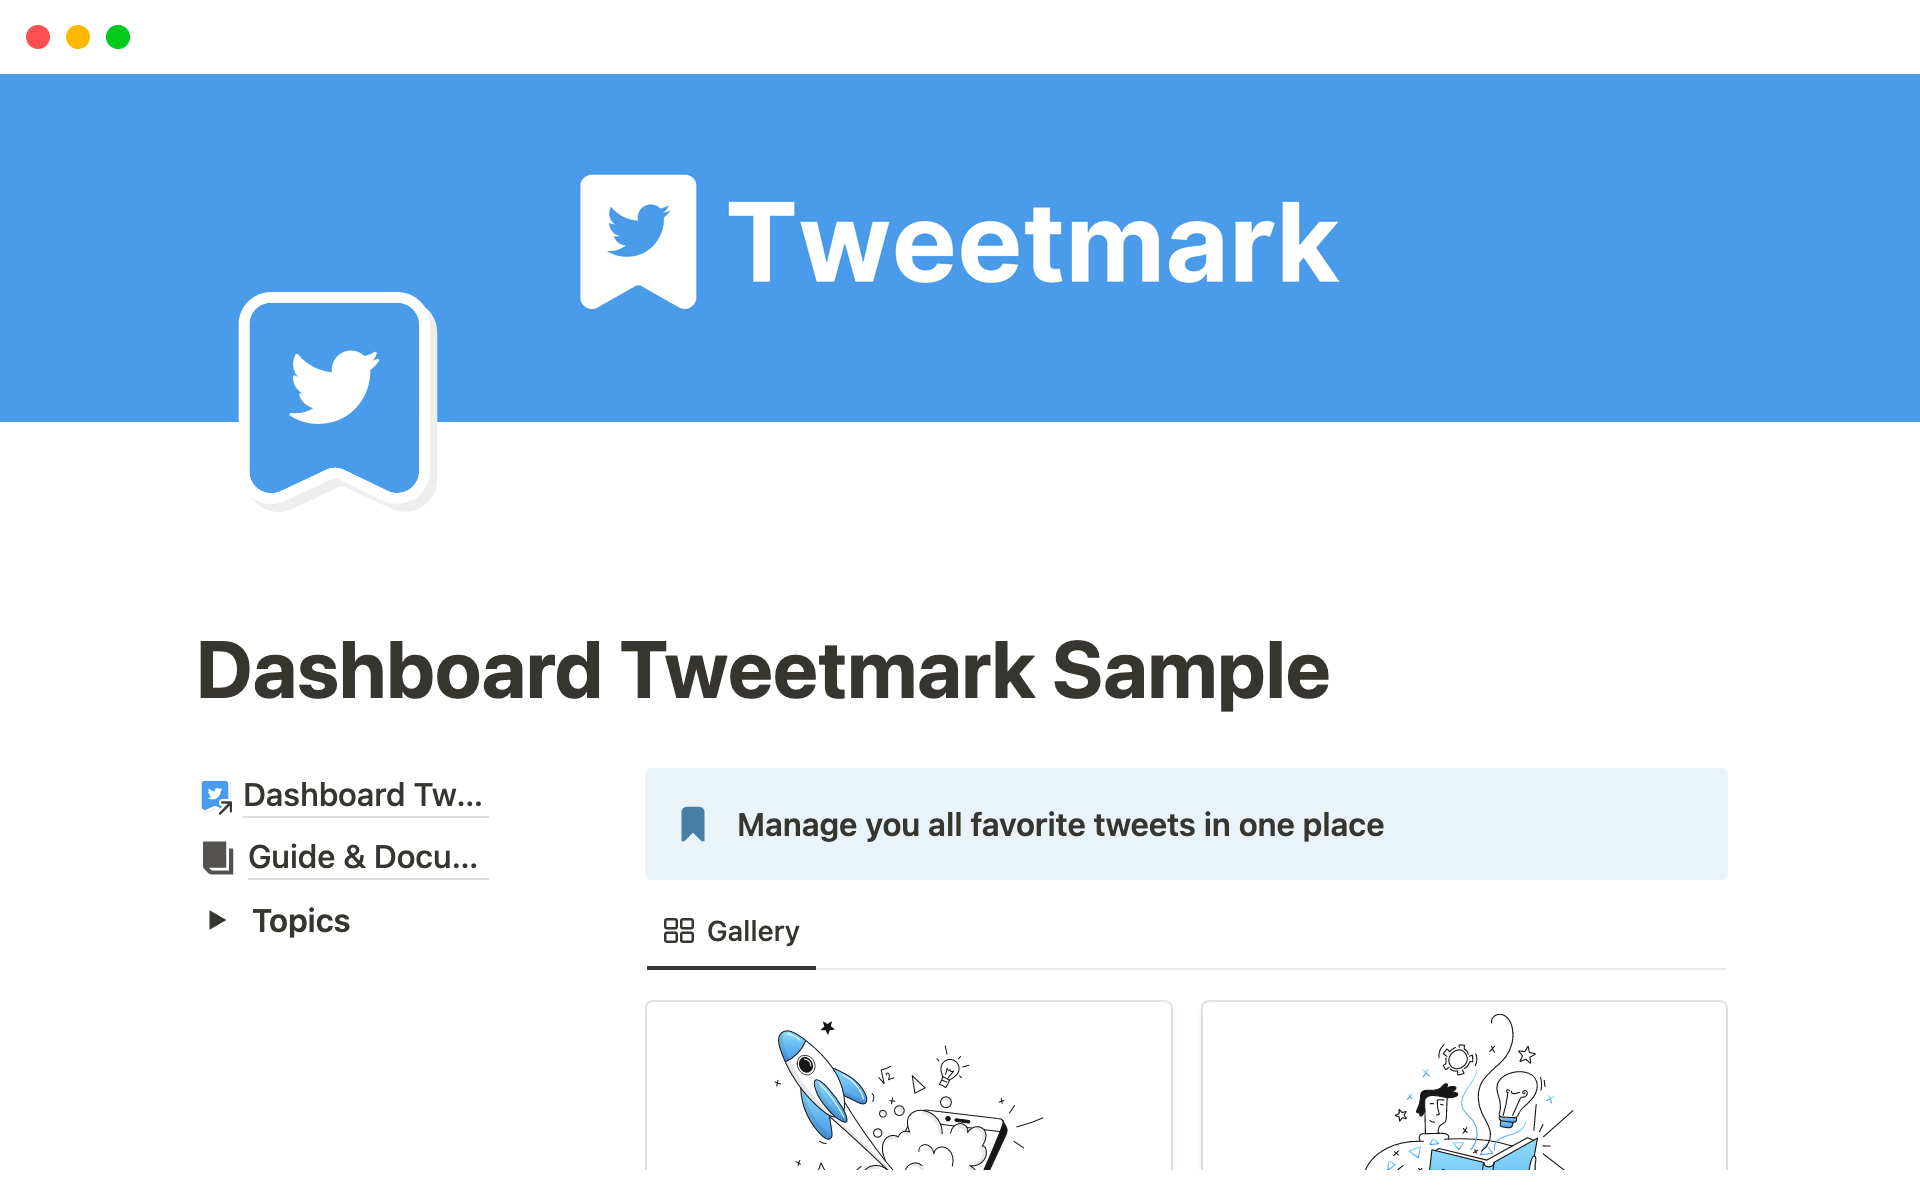 Manage & Bookmark favorite tweets in one place